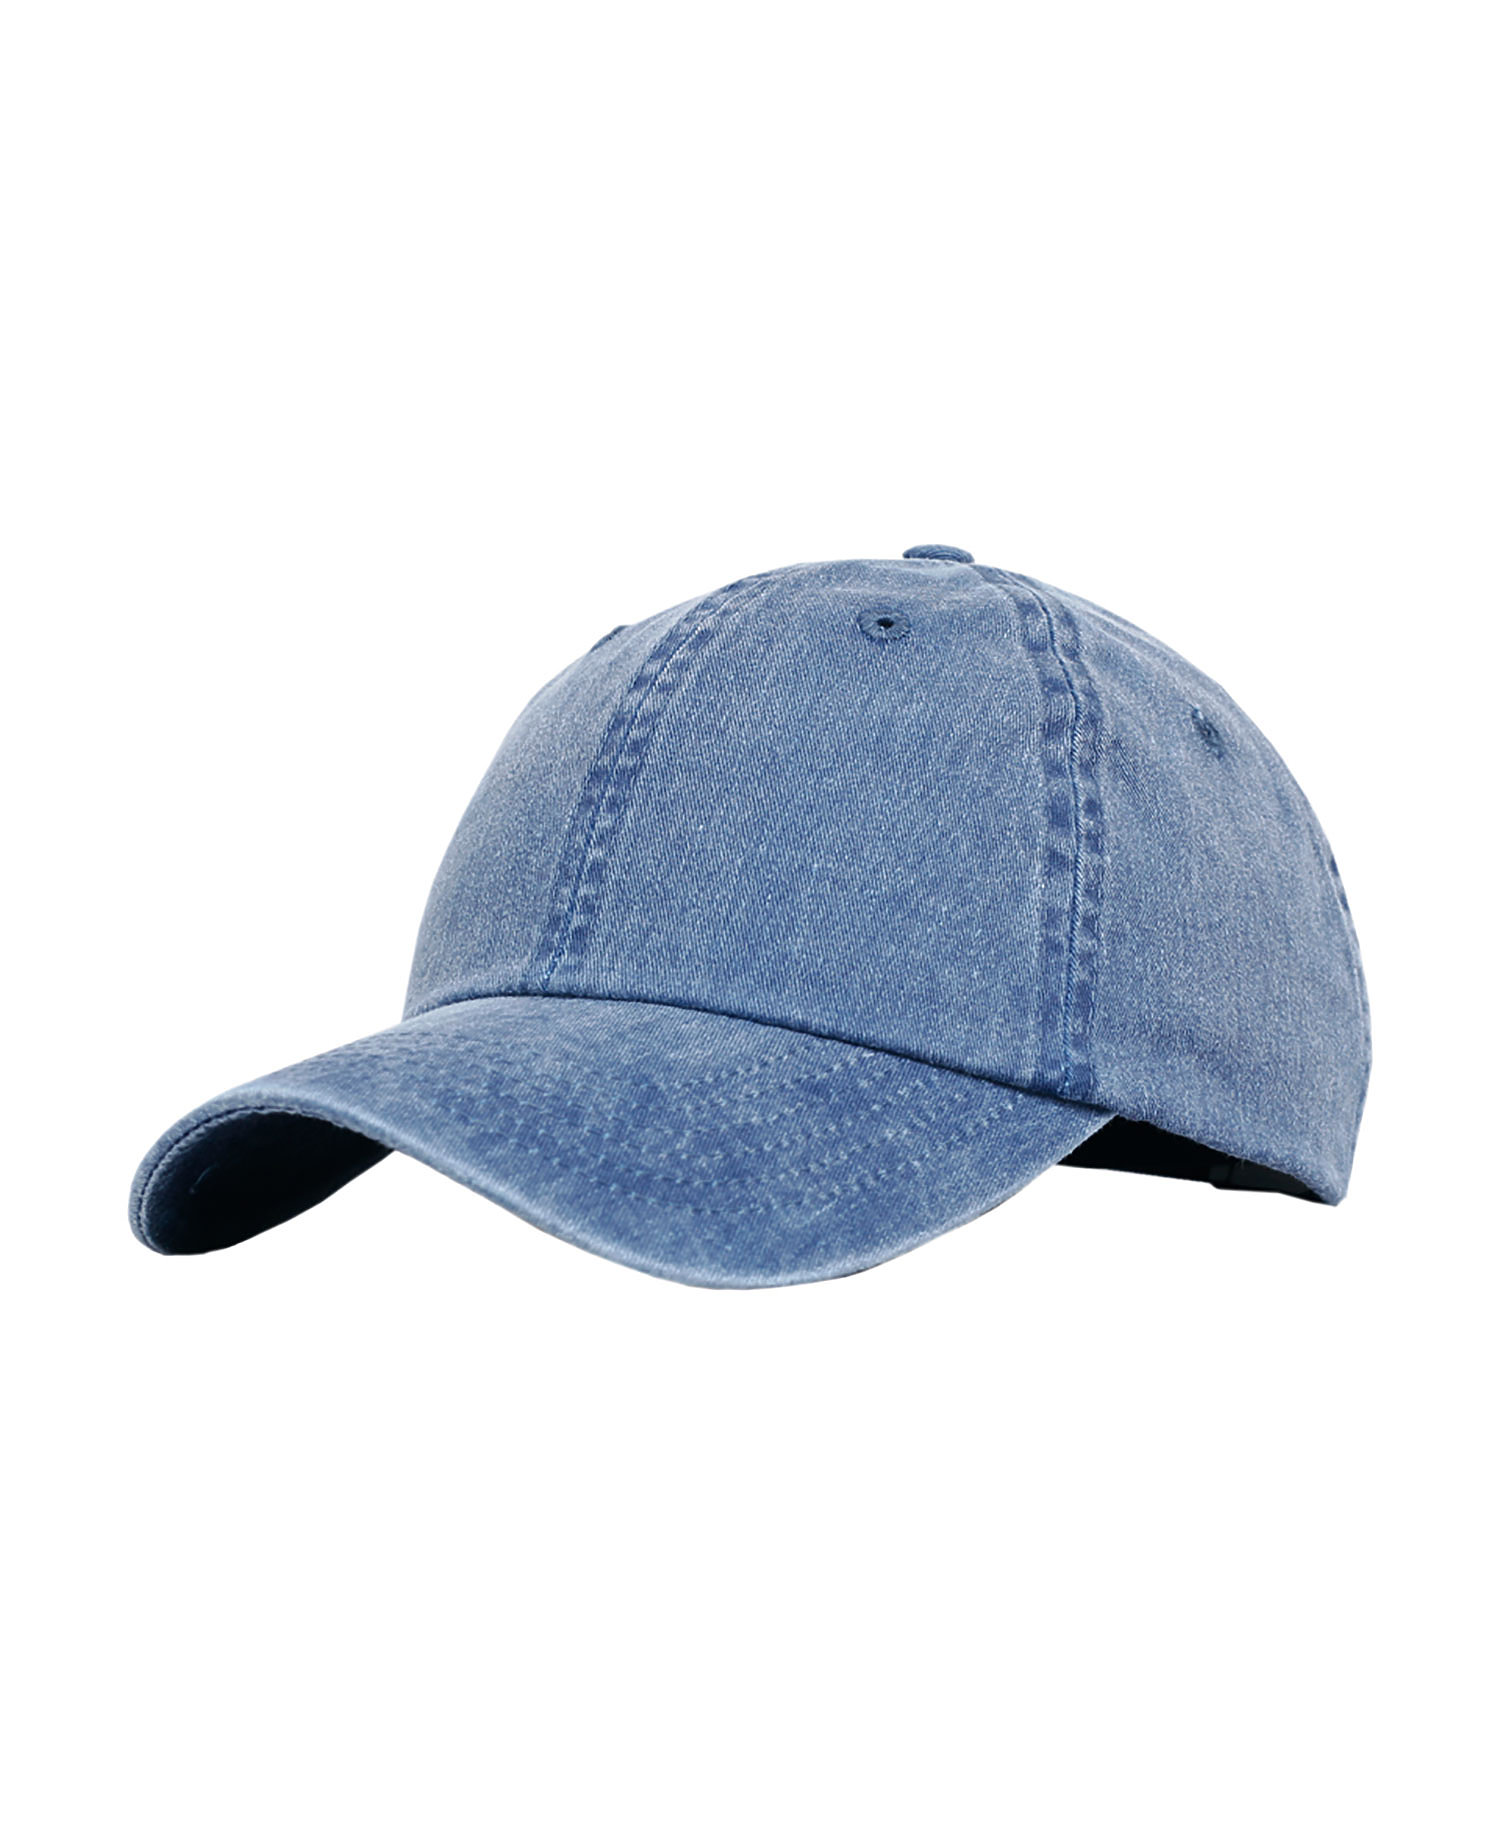 Fahrenheit F0470 - Washed Cotton Pigment Dyed Cap